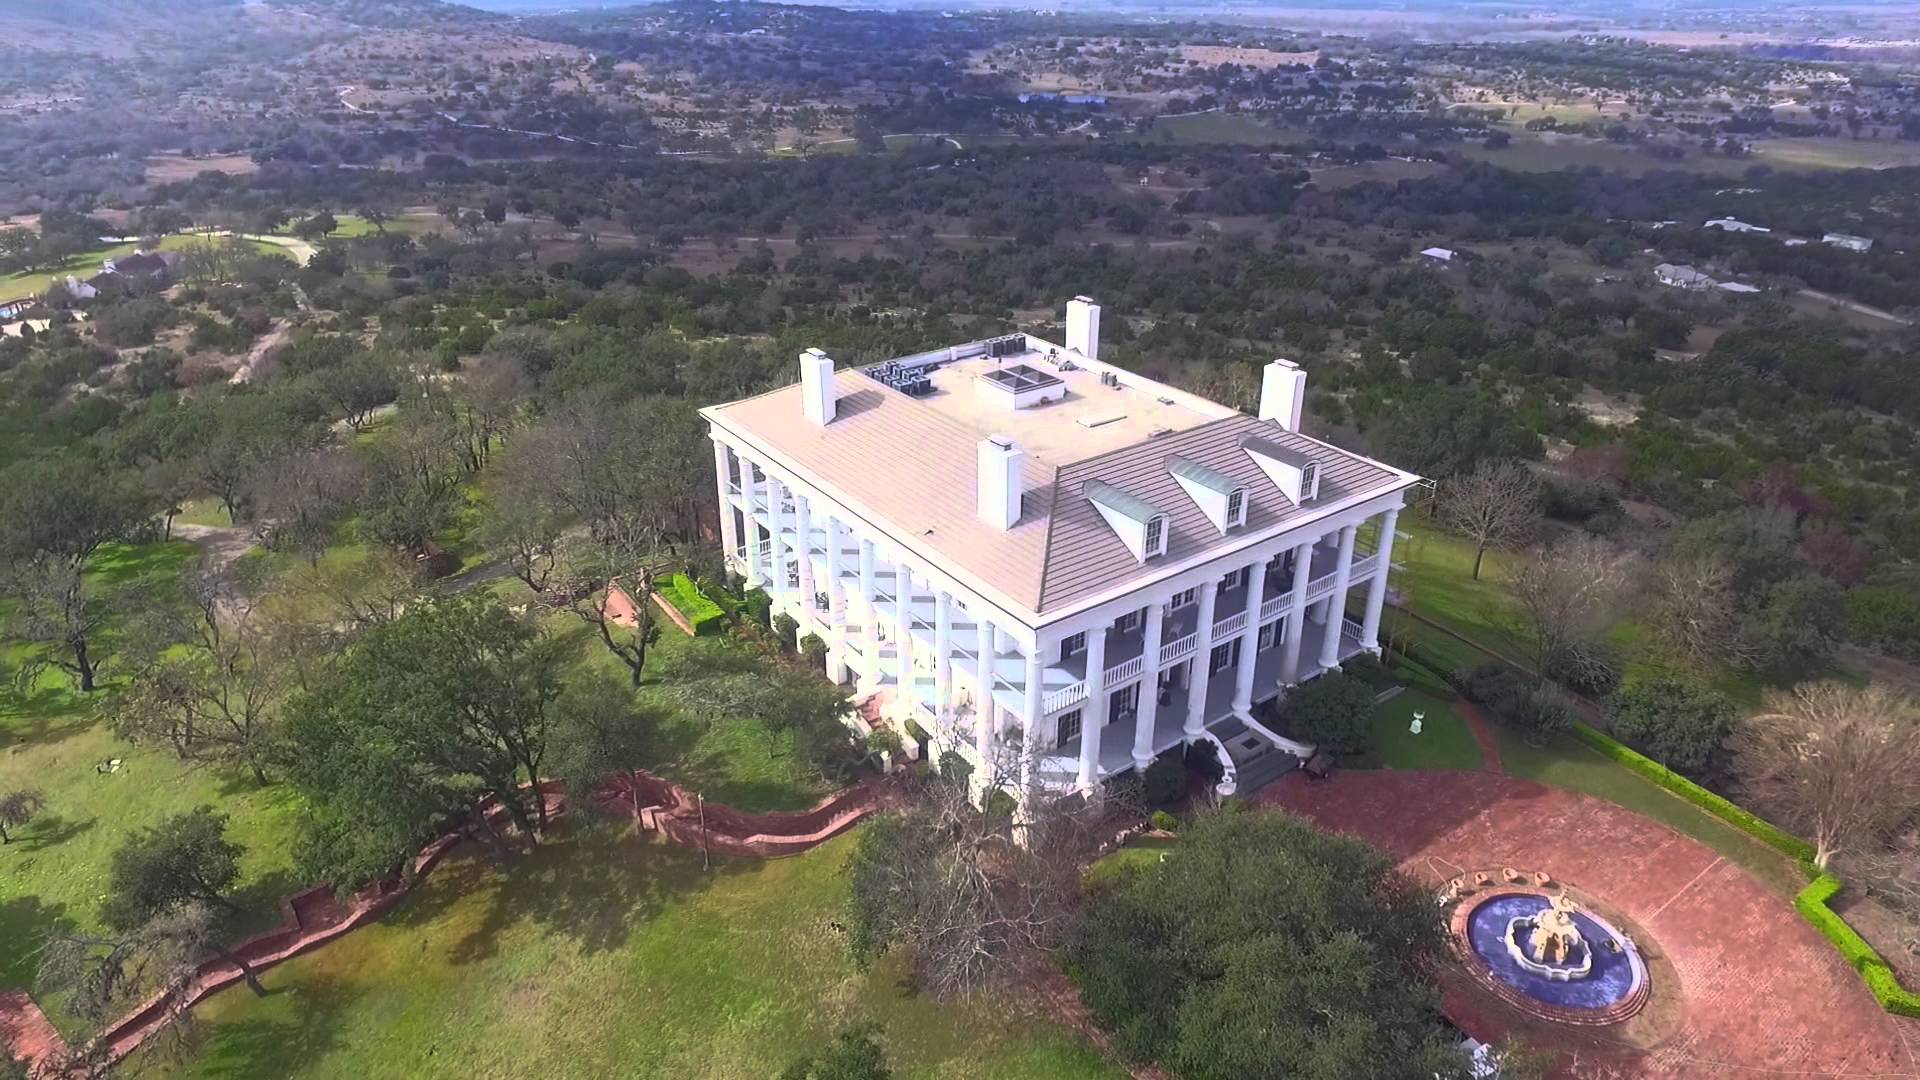 Texas Hill Country Drone 12 15' (1080p Hd) Front Door Tours